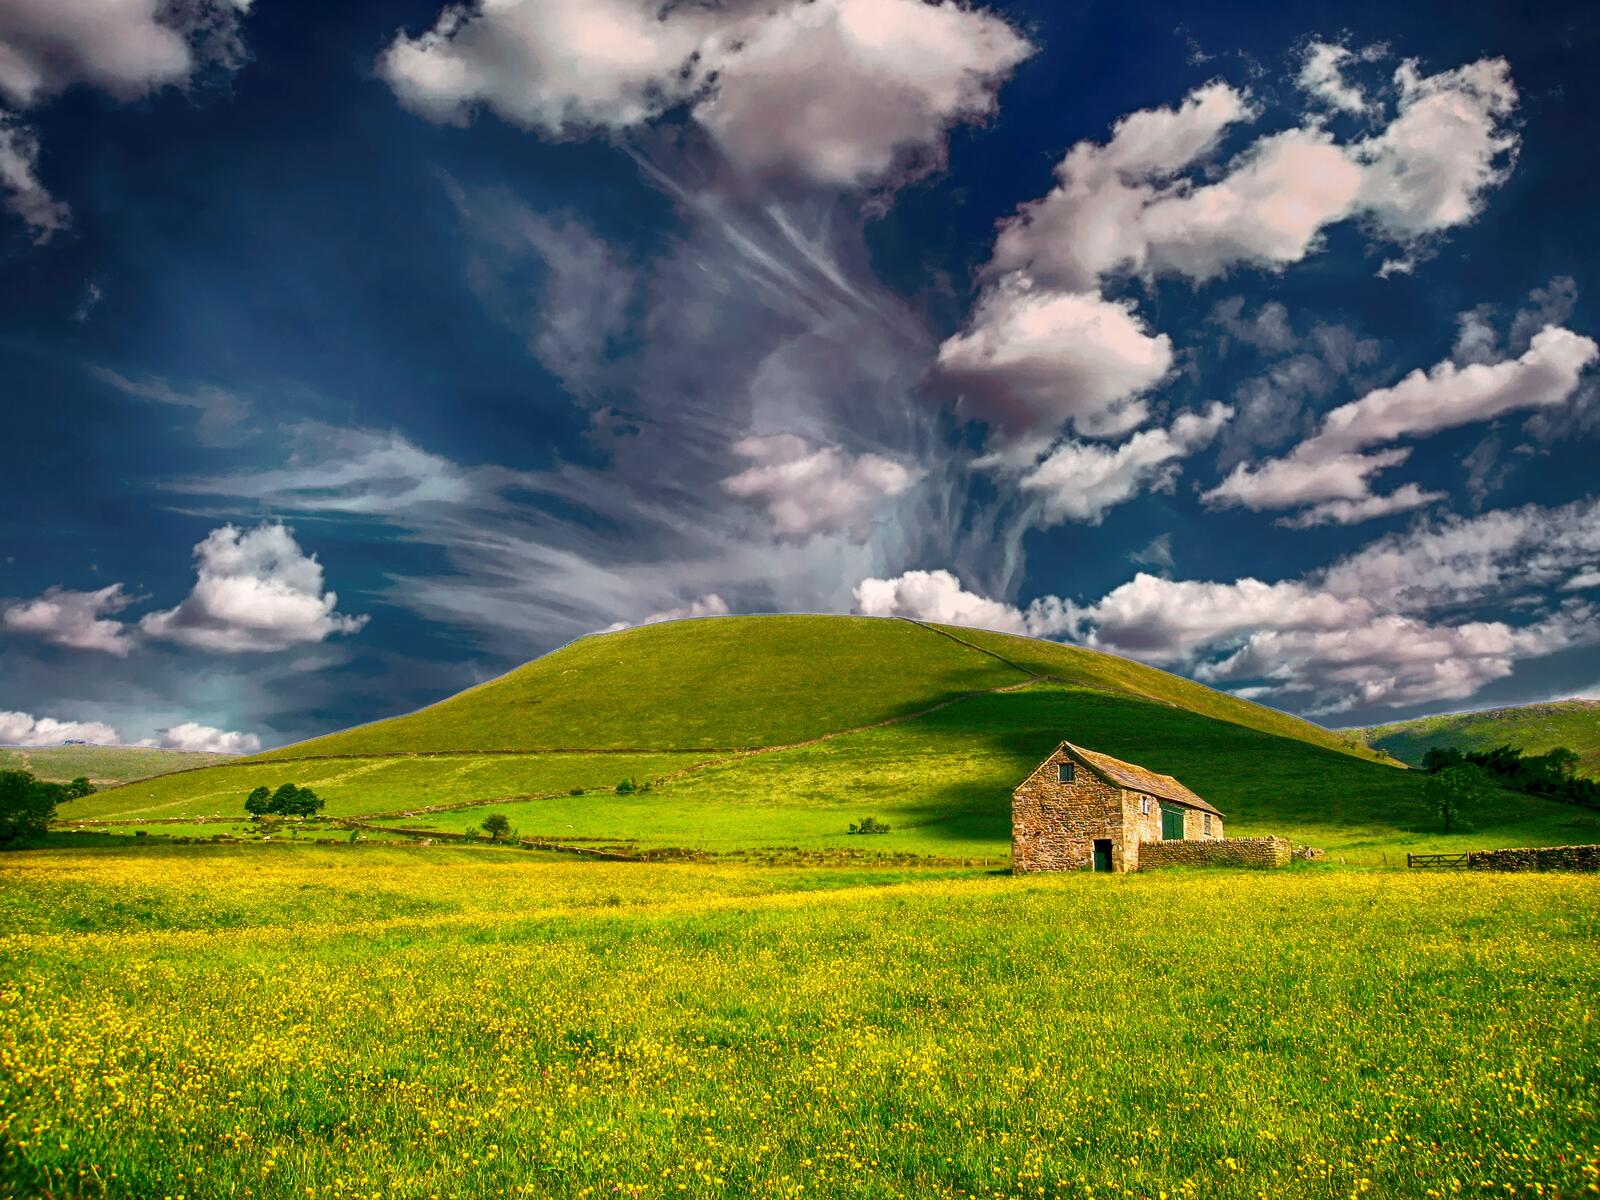 Wallpapers clouds countryside outdoor on the desktop